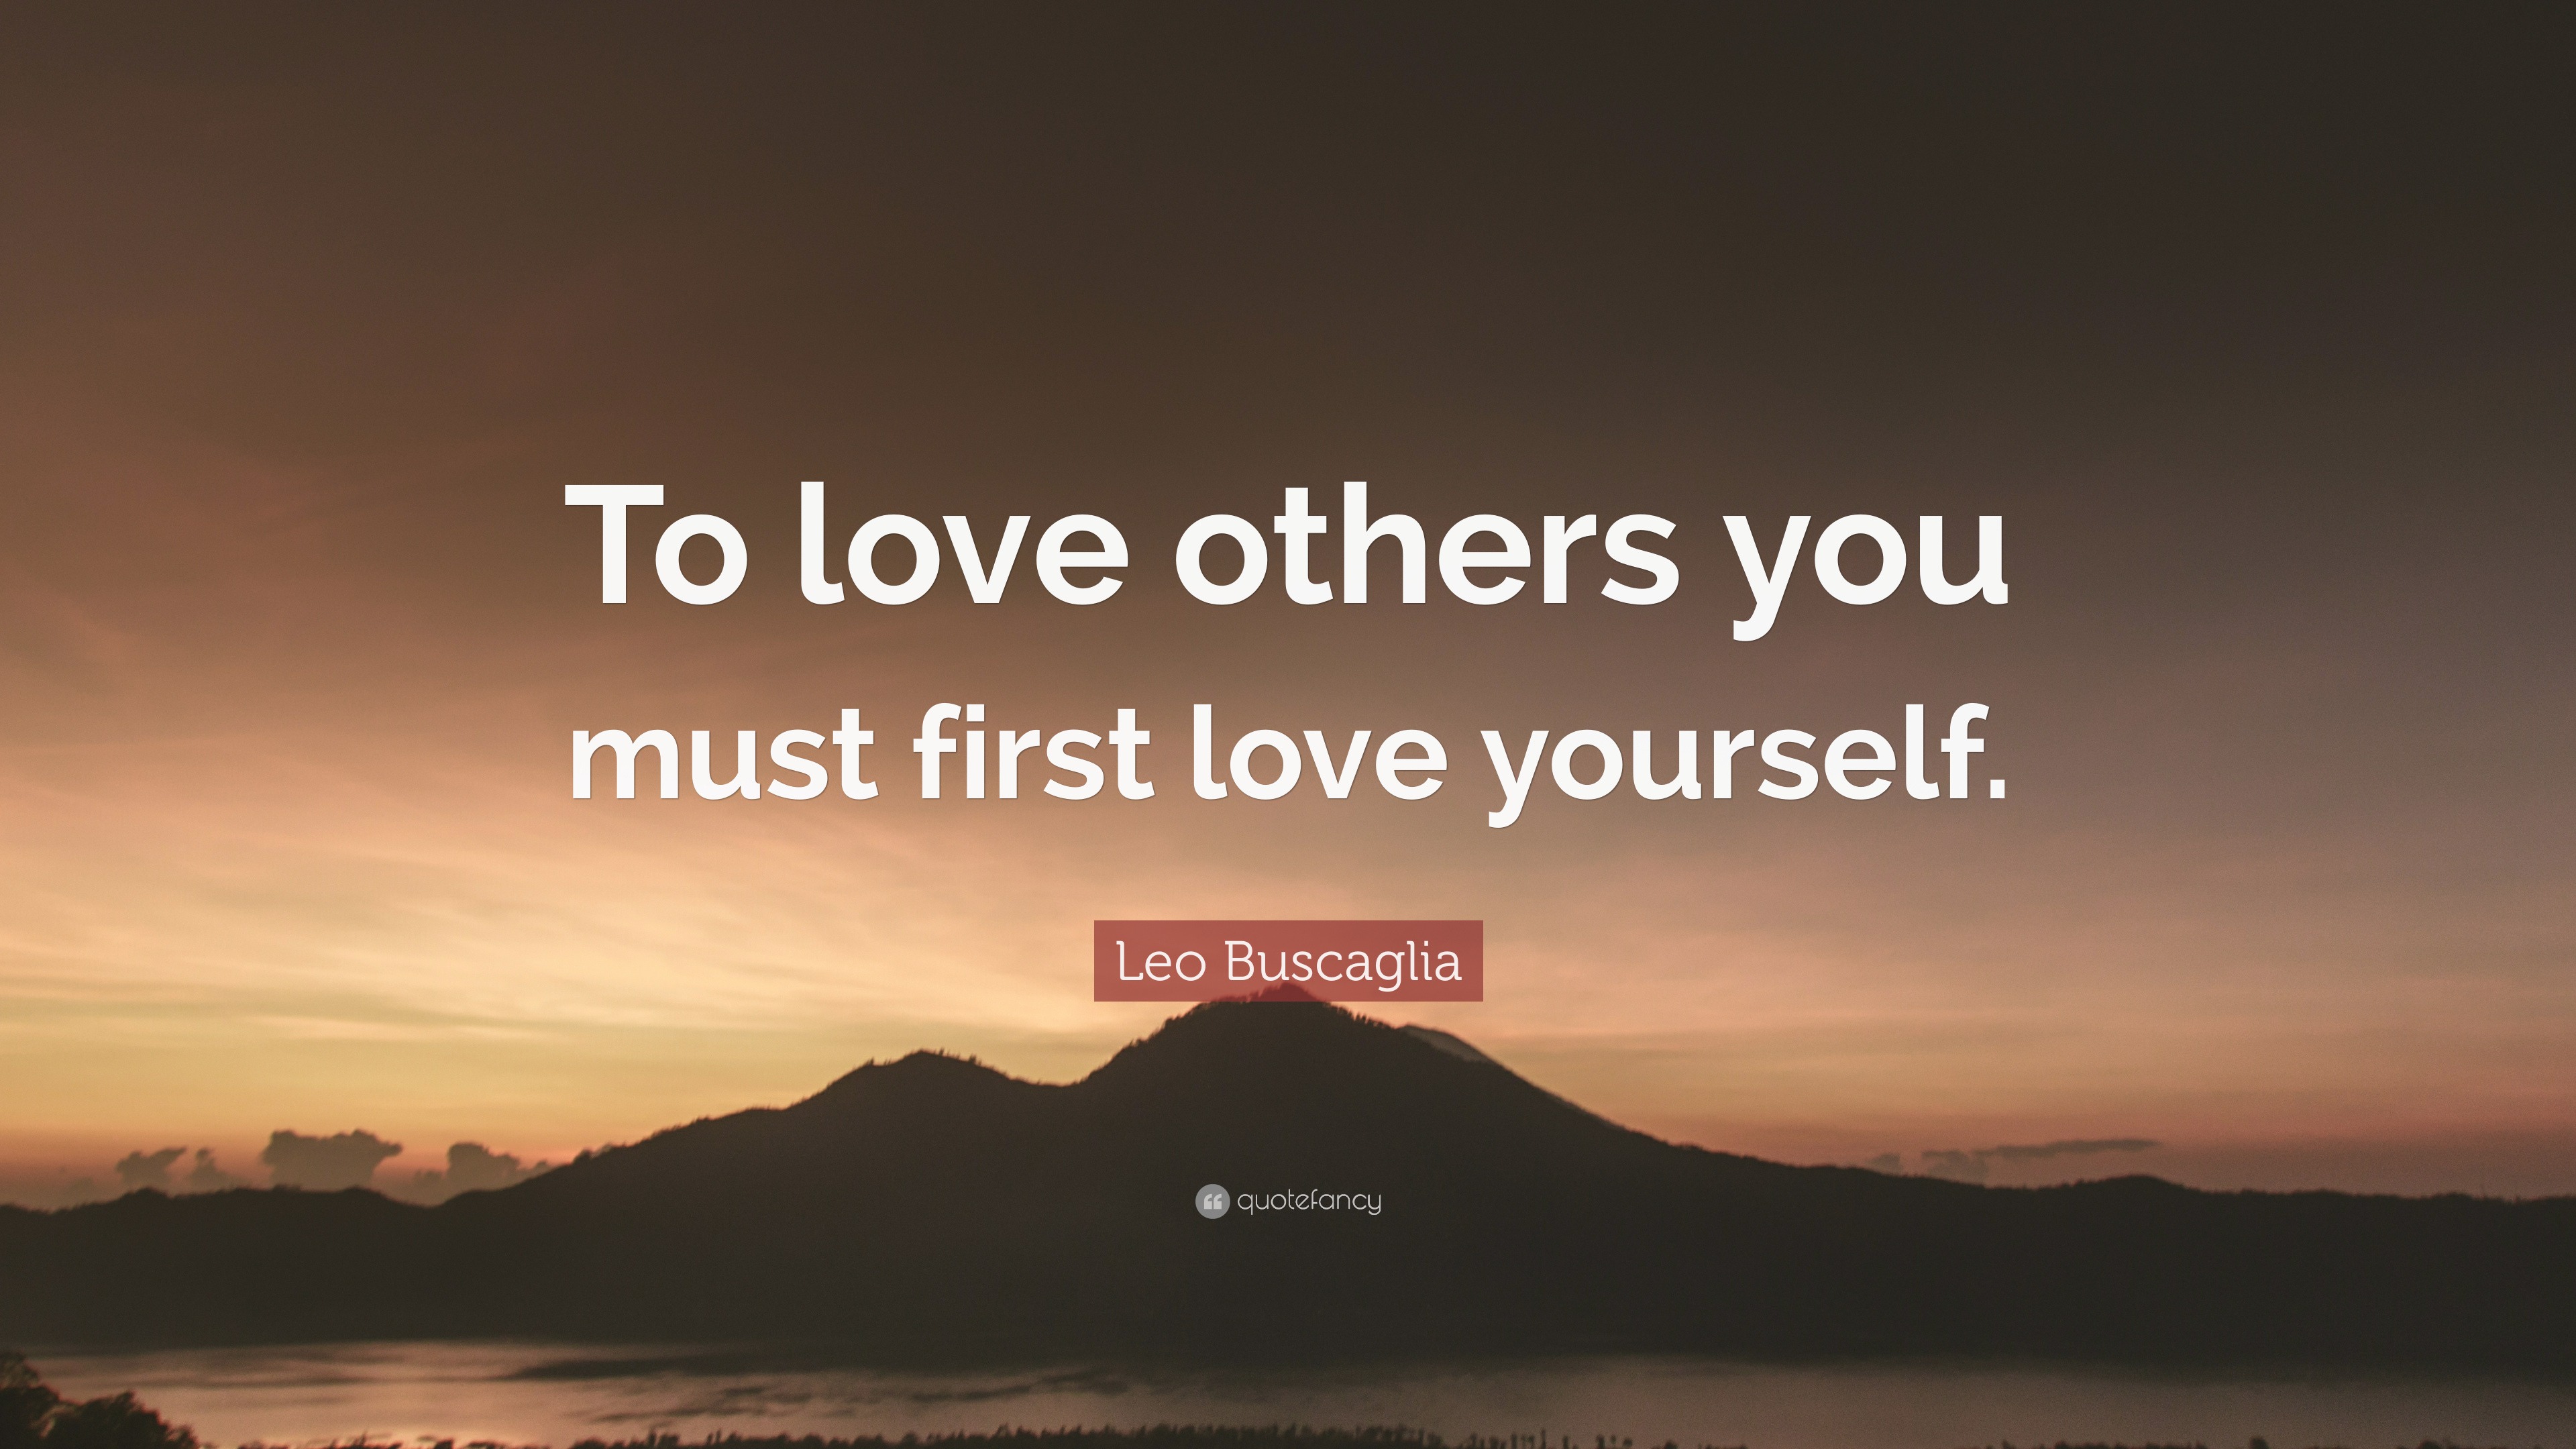 Leo Buscaglia Quote: “To love others you must first love yourself.” (12